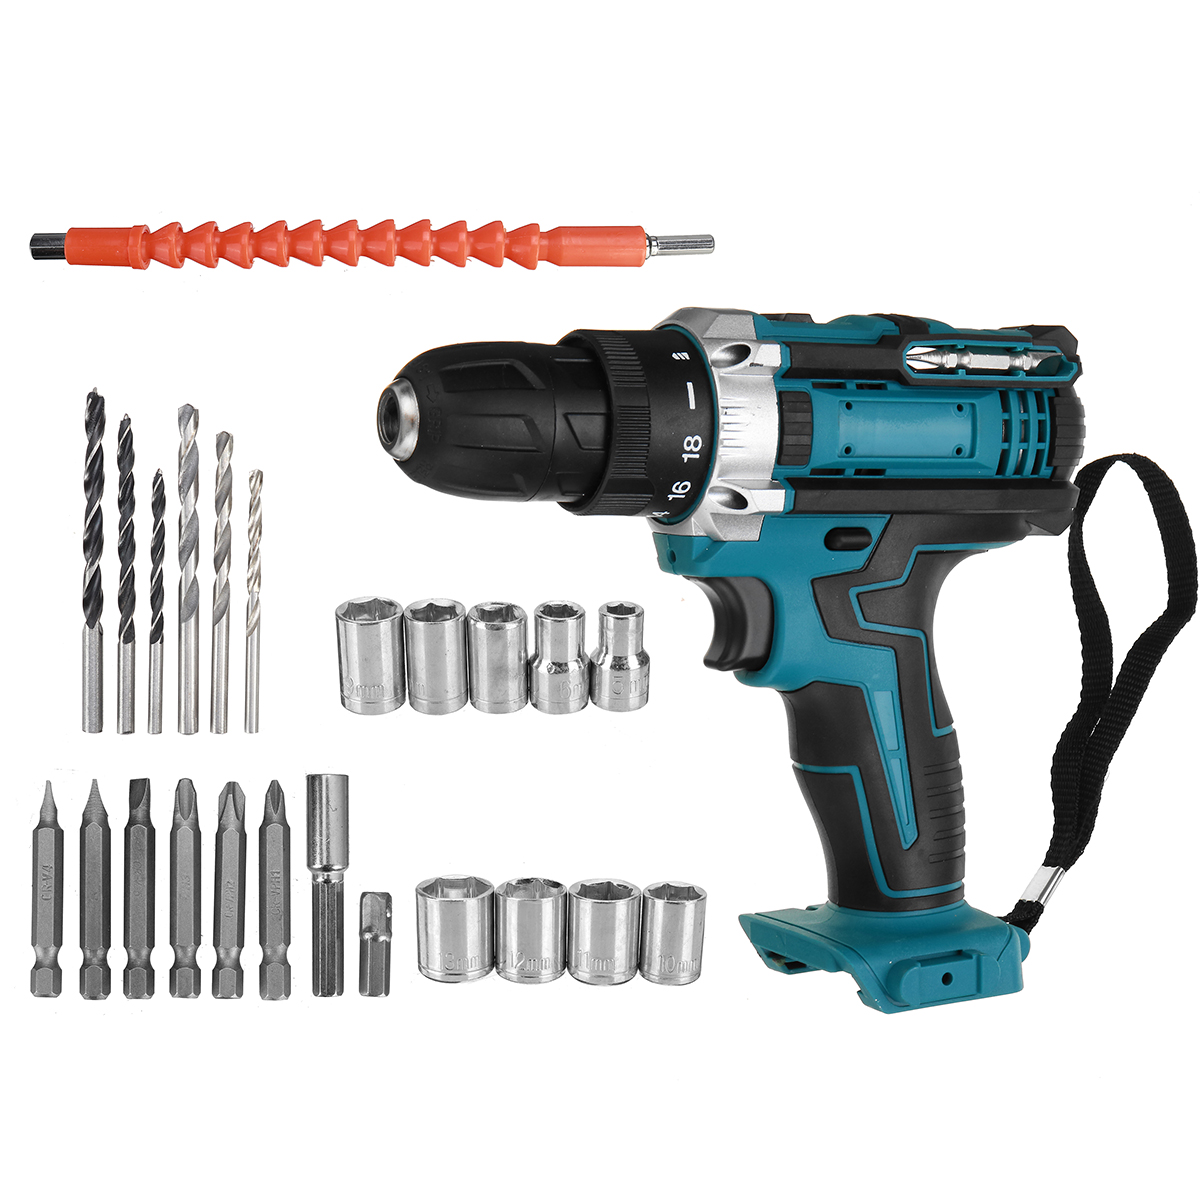 2000rpm-Impact-Drill-Driver-Rechargeable-Electric-Screwdriver-Portable-Wood-Metal-Drilling-Tool-w-1p-1852108-8